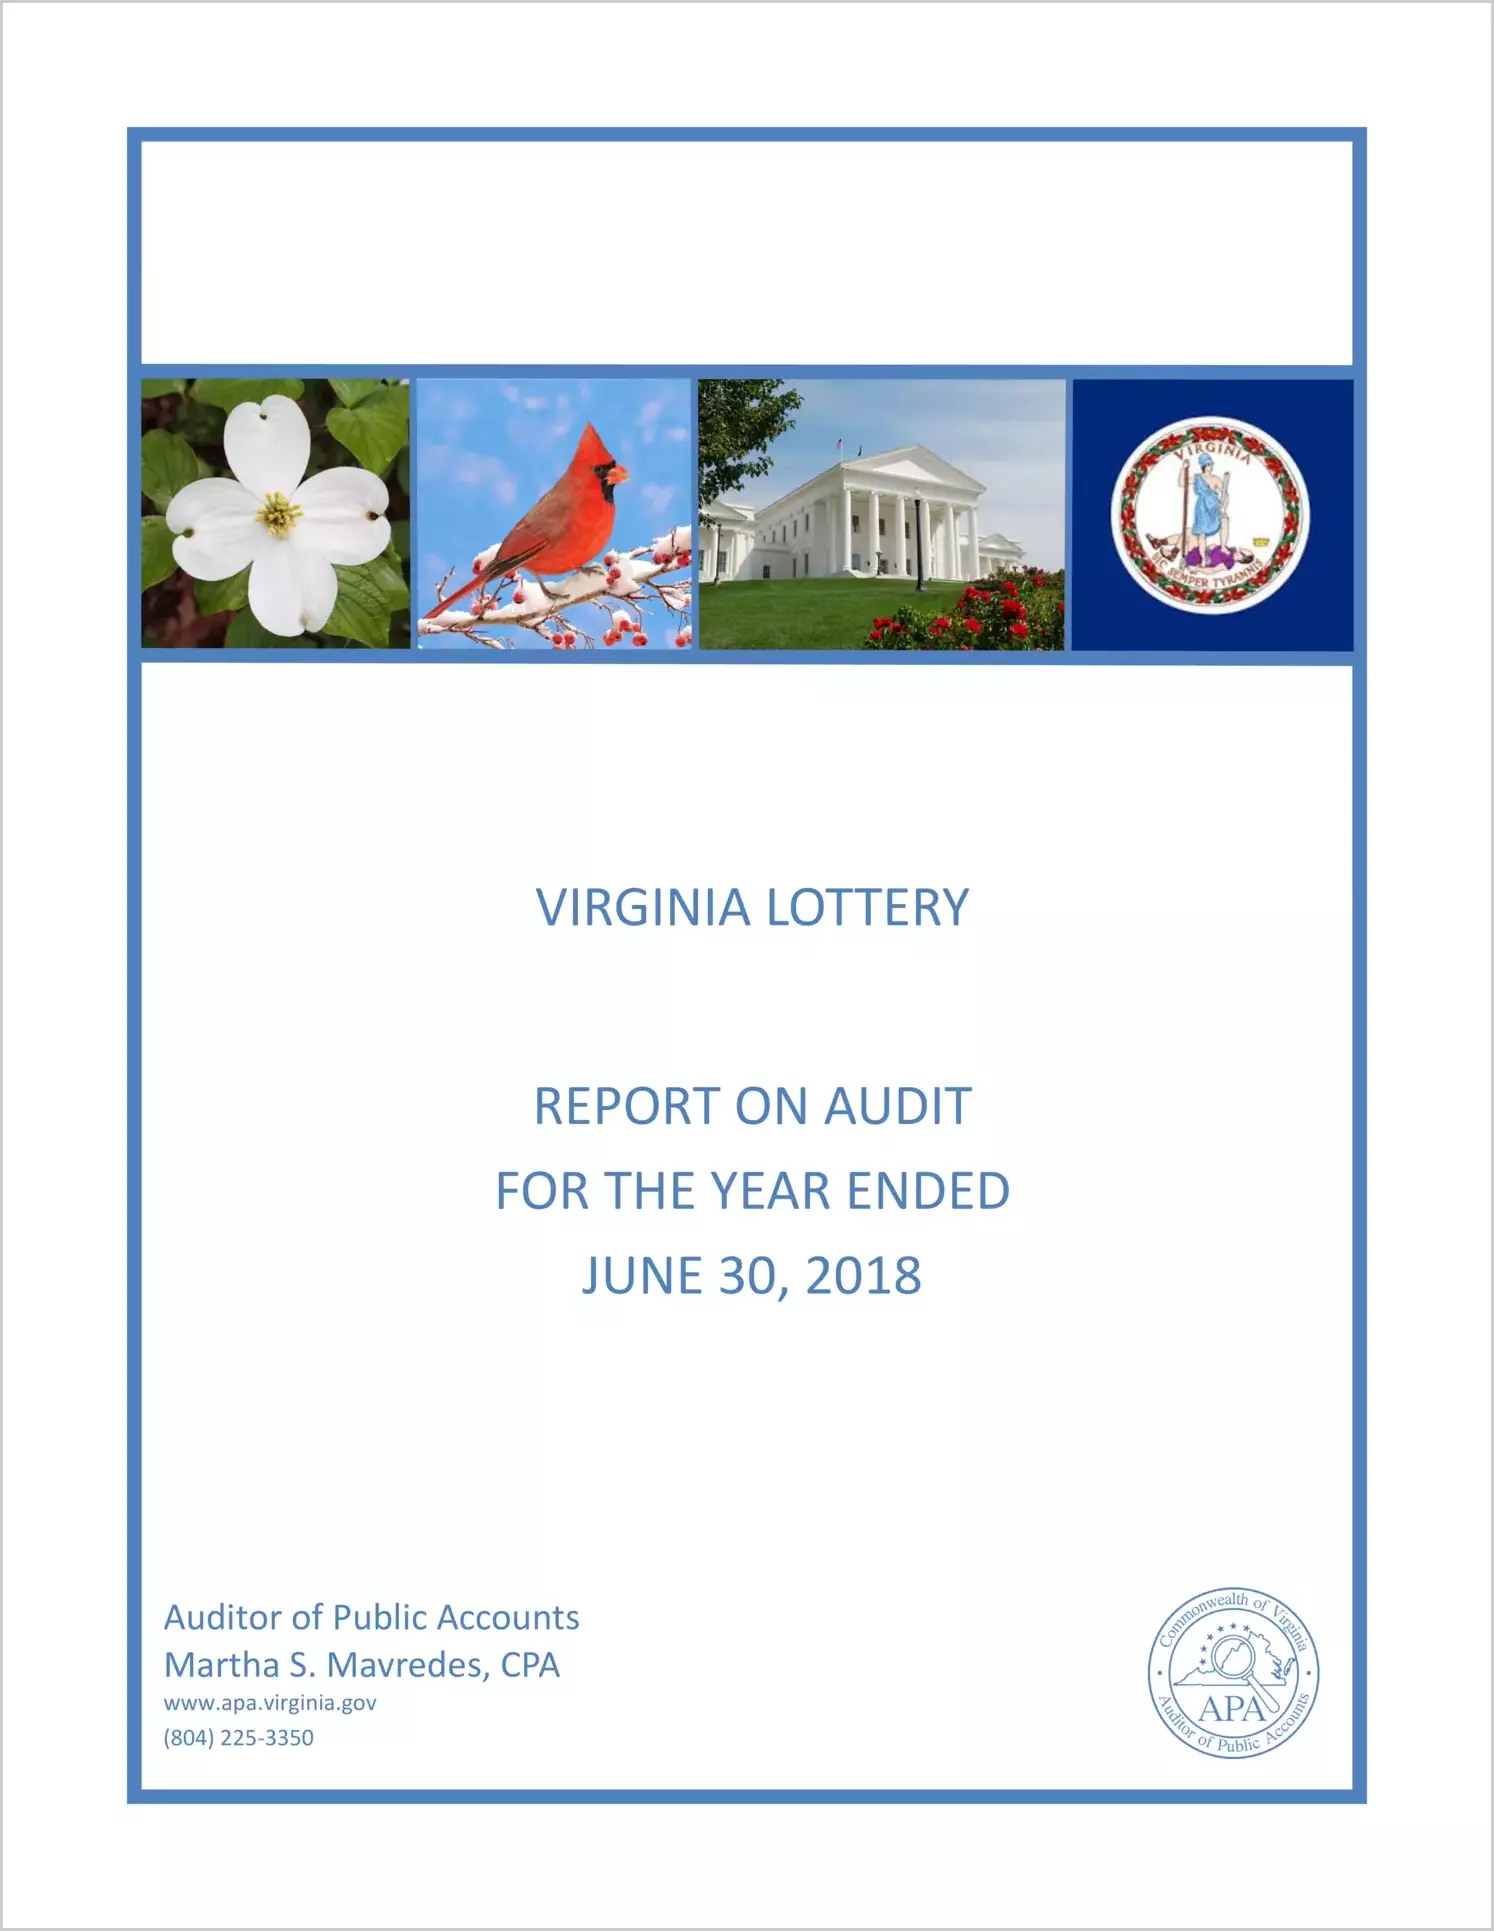 Virginia Lottery for the year ended June 30, 2018